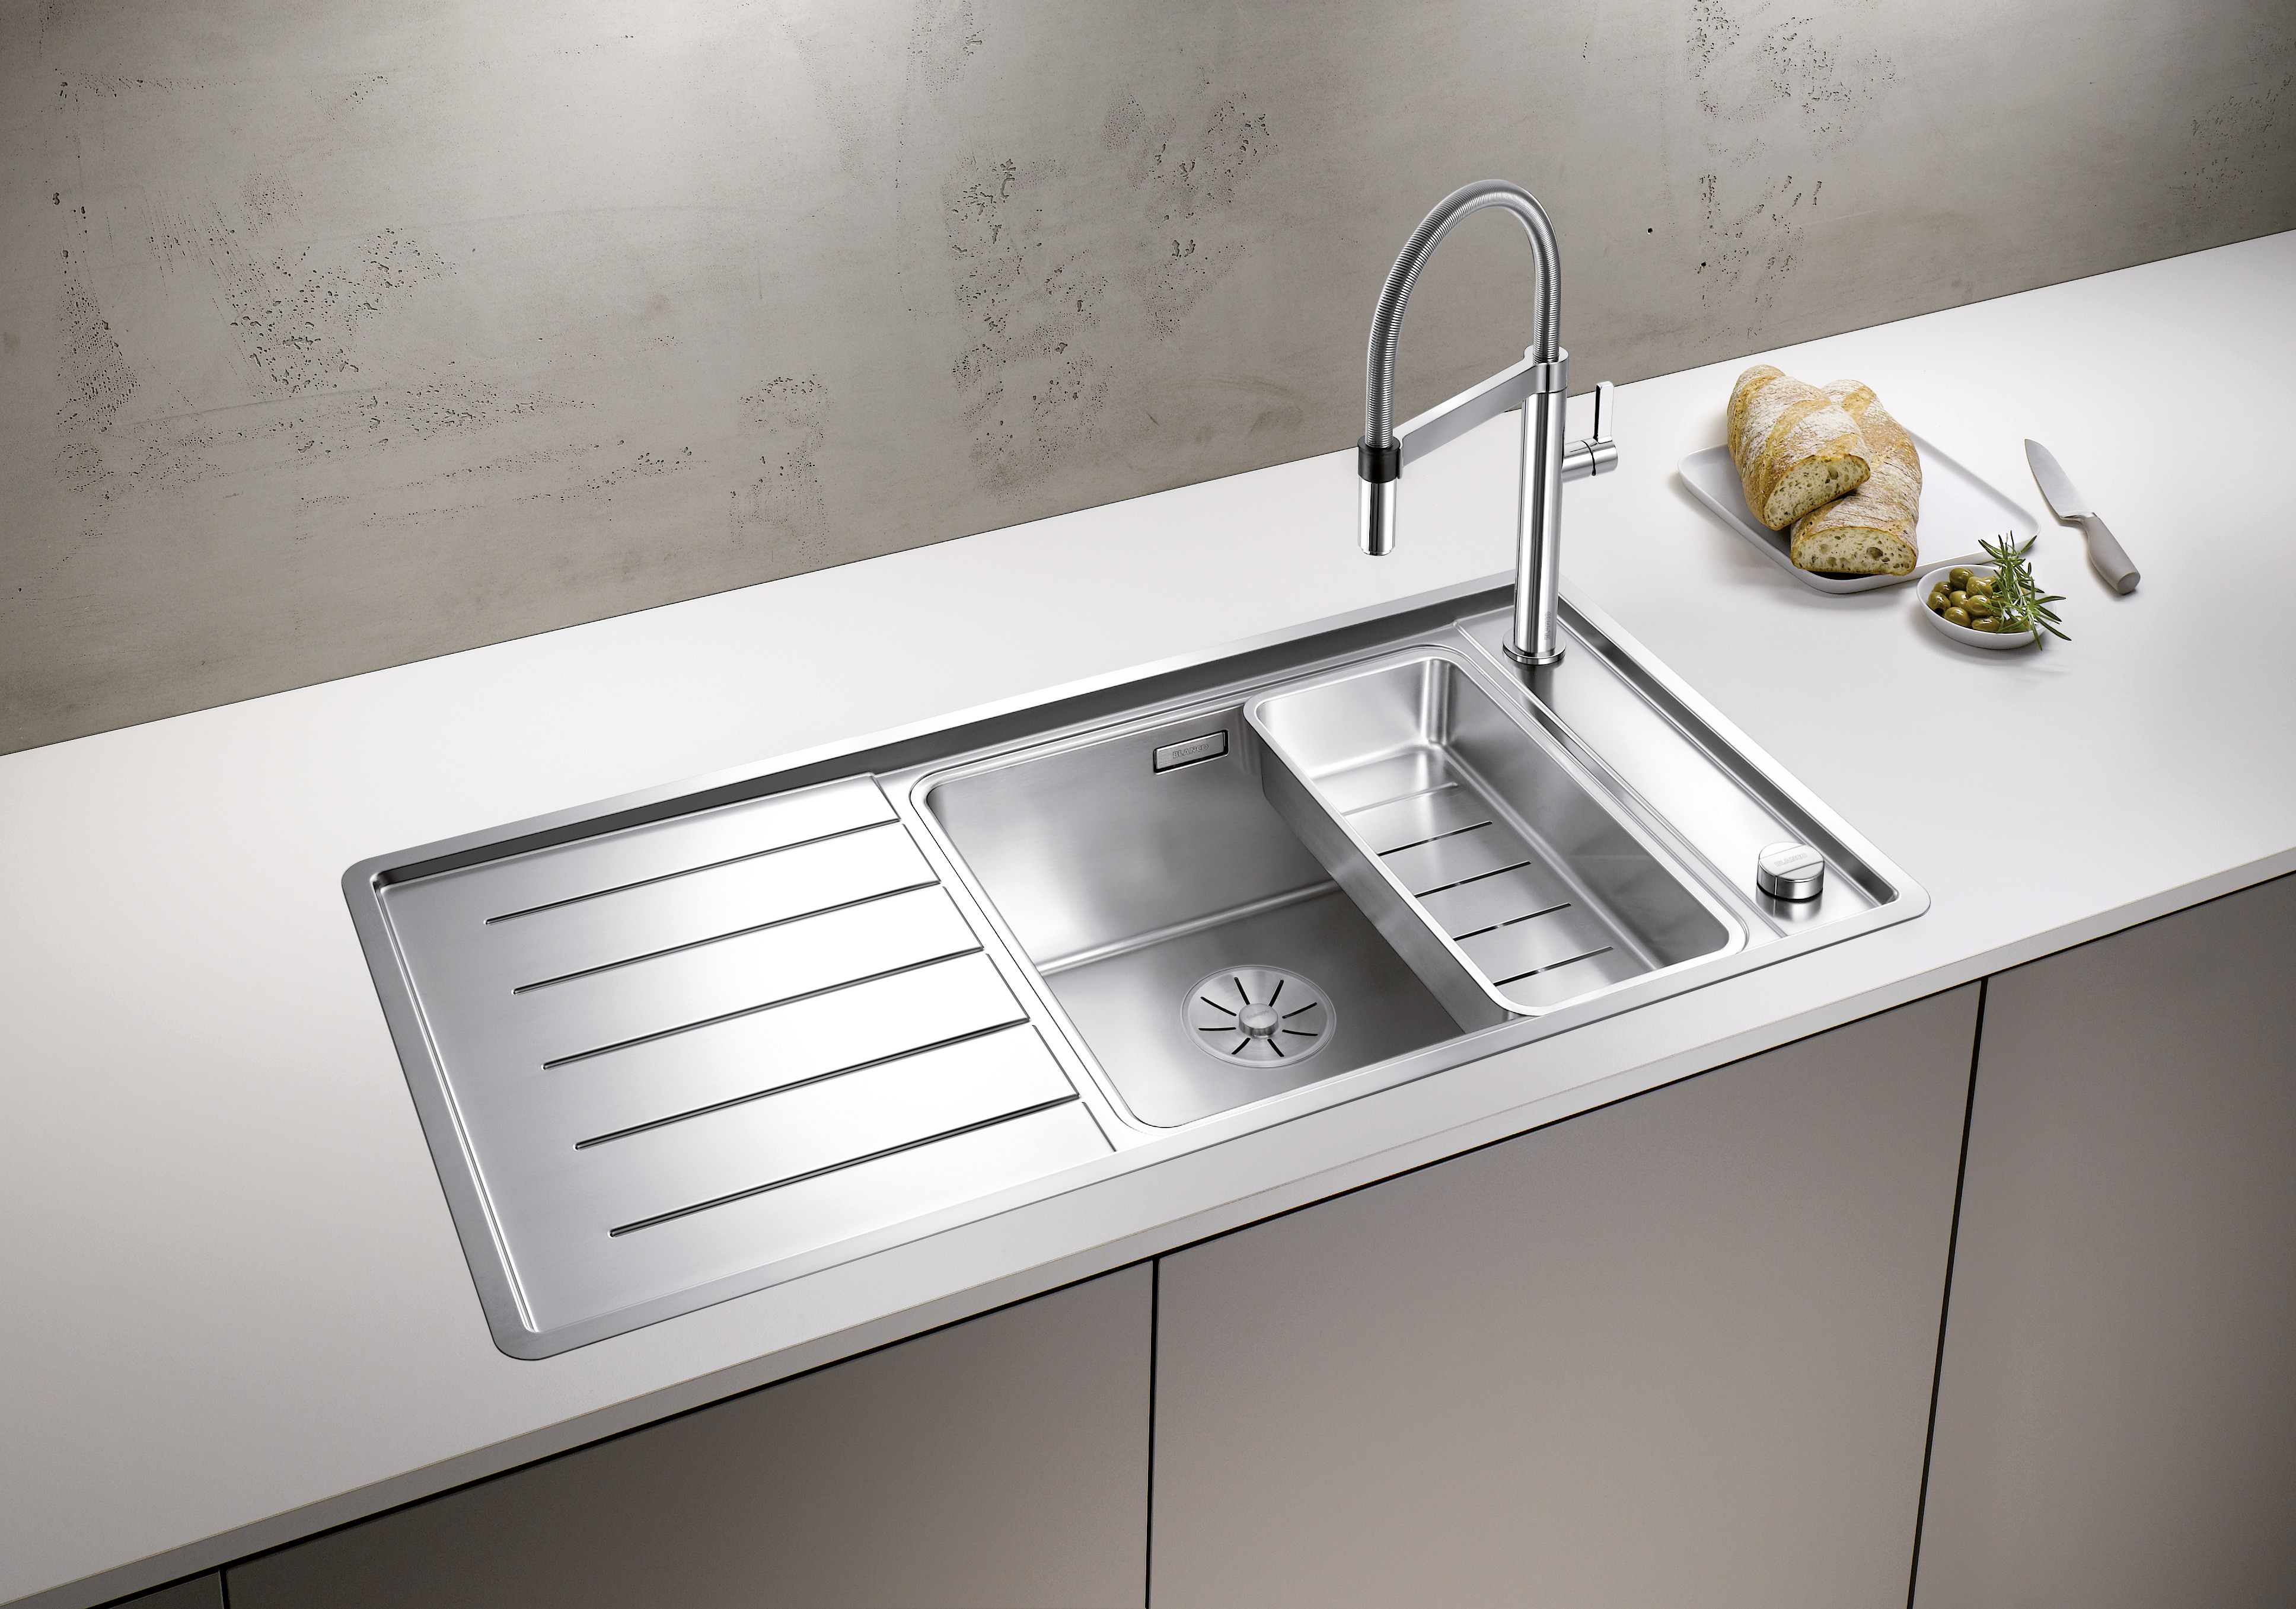 Different finishes for stainless steel sinks